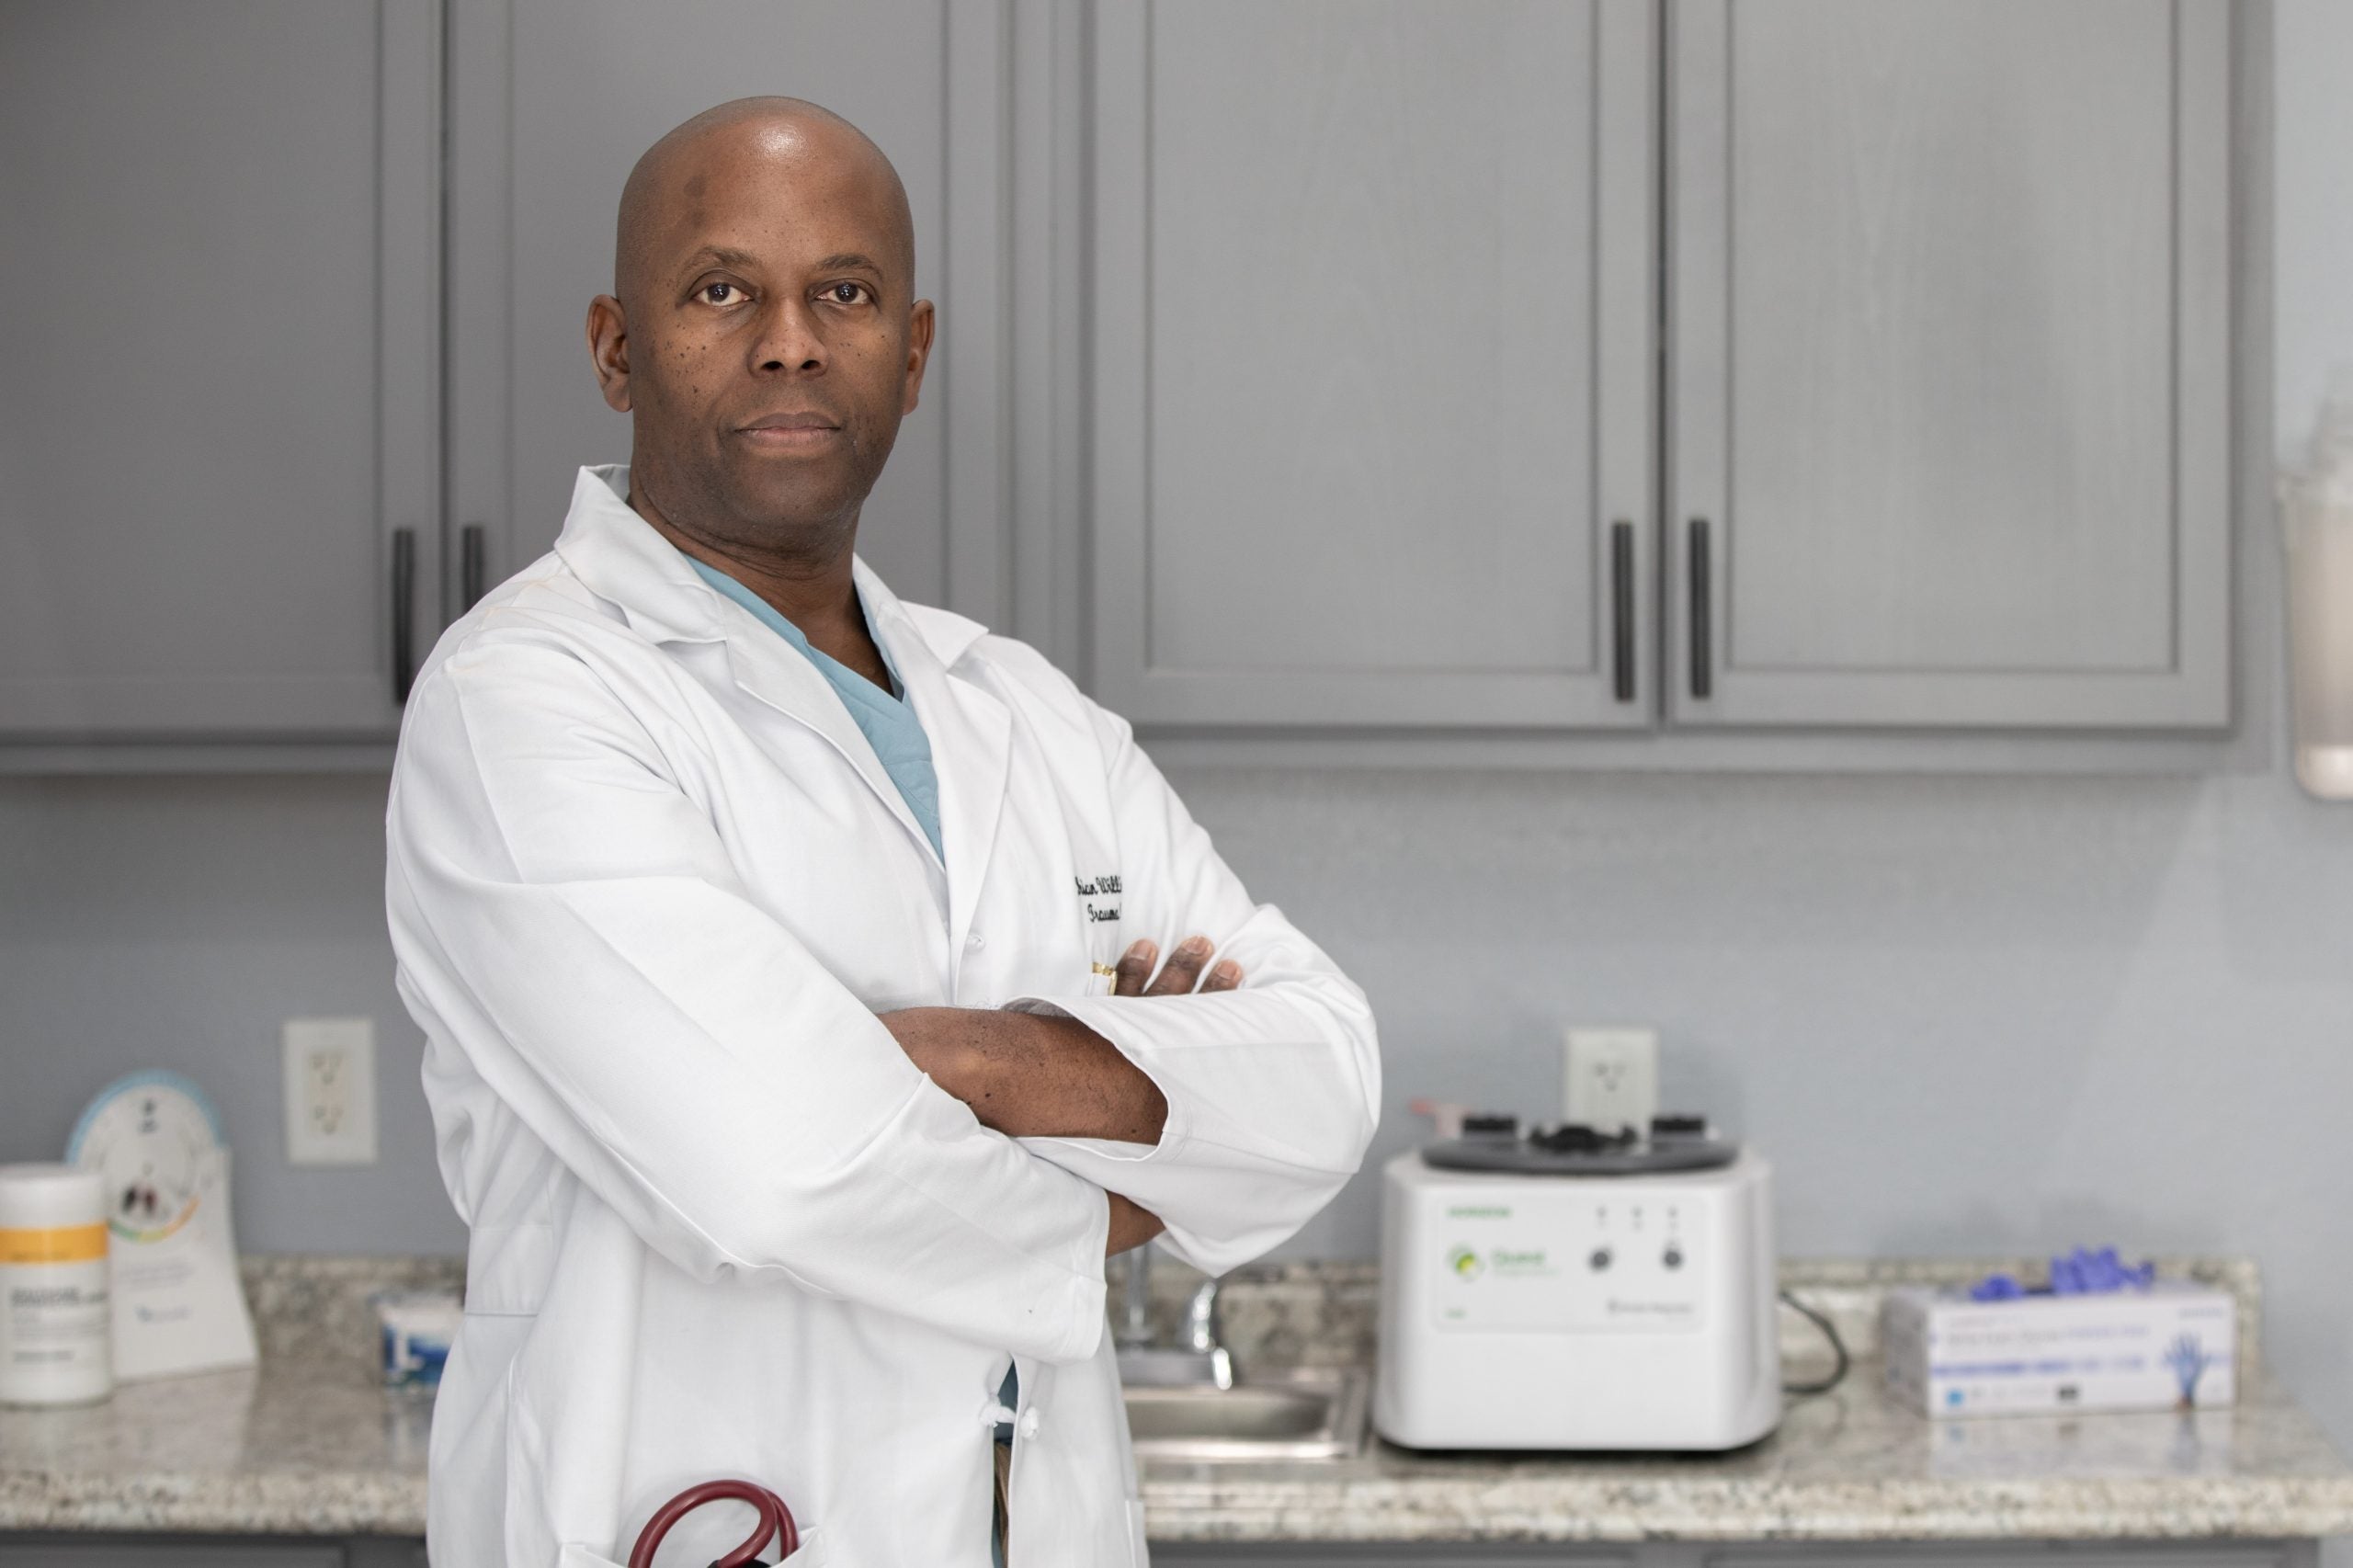 House Call: This Black Doctor Running For Congress Could Be First Trauma Surgeon Ever To Be Elected